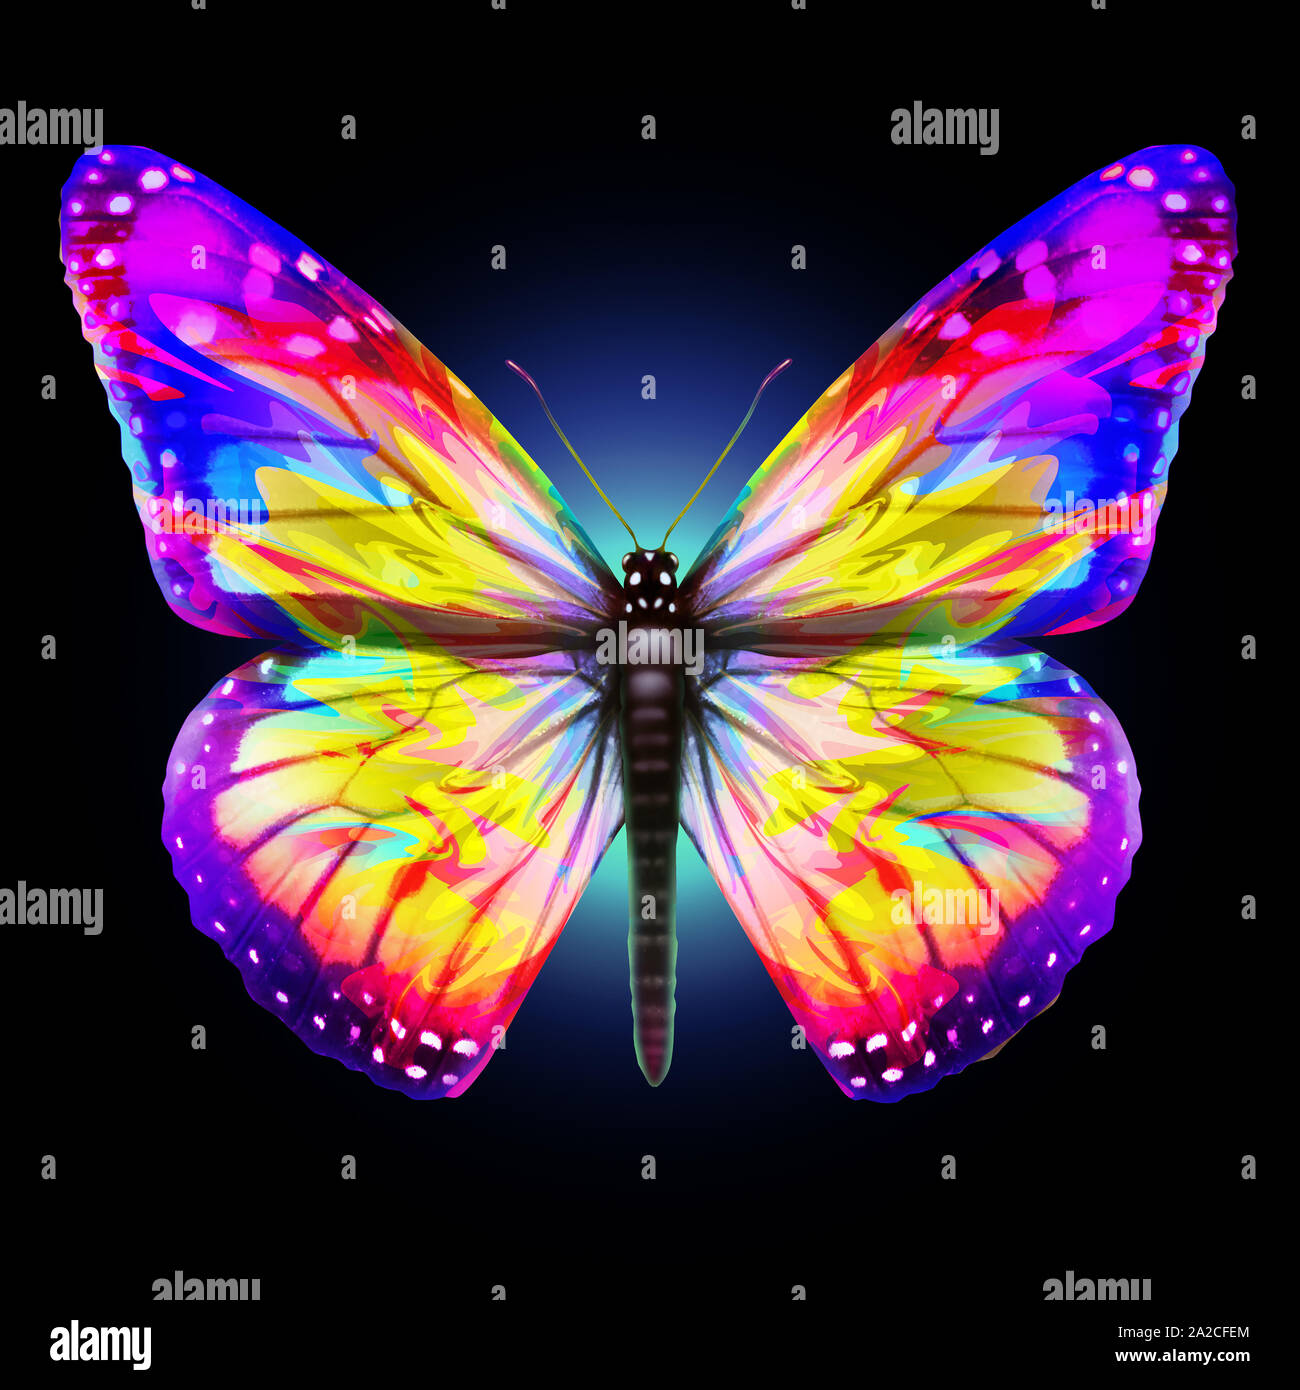 Fantasy Butterfly as a beautiful bright abstract ornamental decorative insect design representing wings of magical butterflies with 3D illustration. Stock Photo